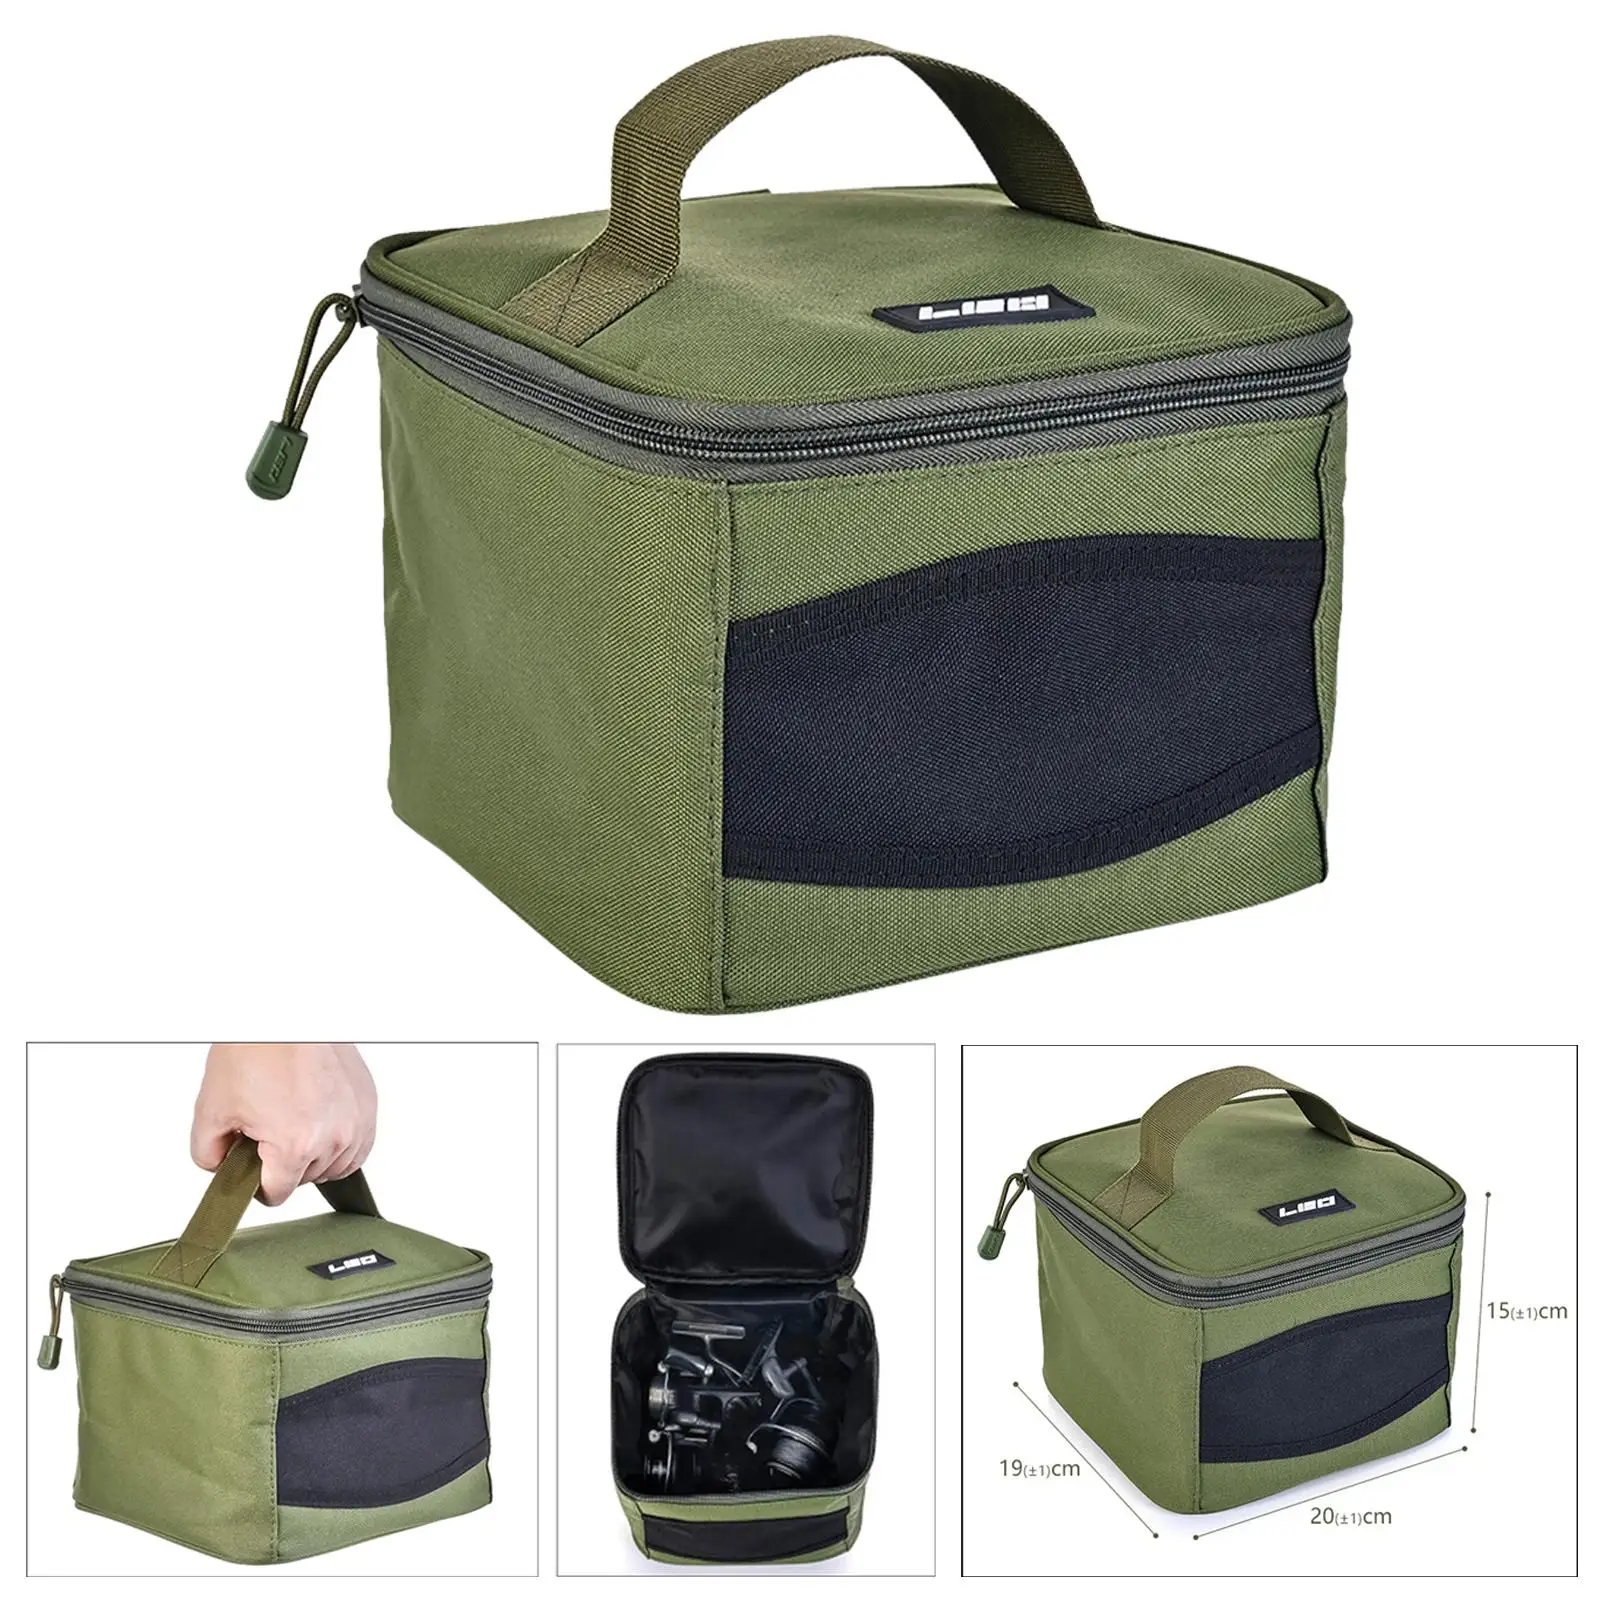 Multifunctional Fishing Reel Storage Bag Dust Proof Durable Protective Case Oxford Fishing Tackle Pack for Camping Hiking